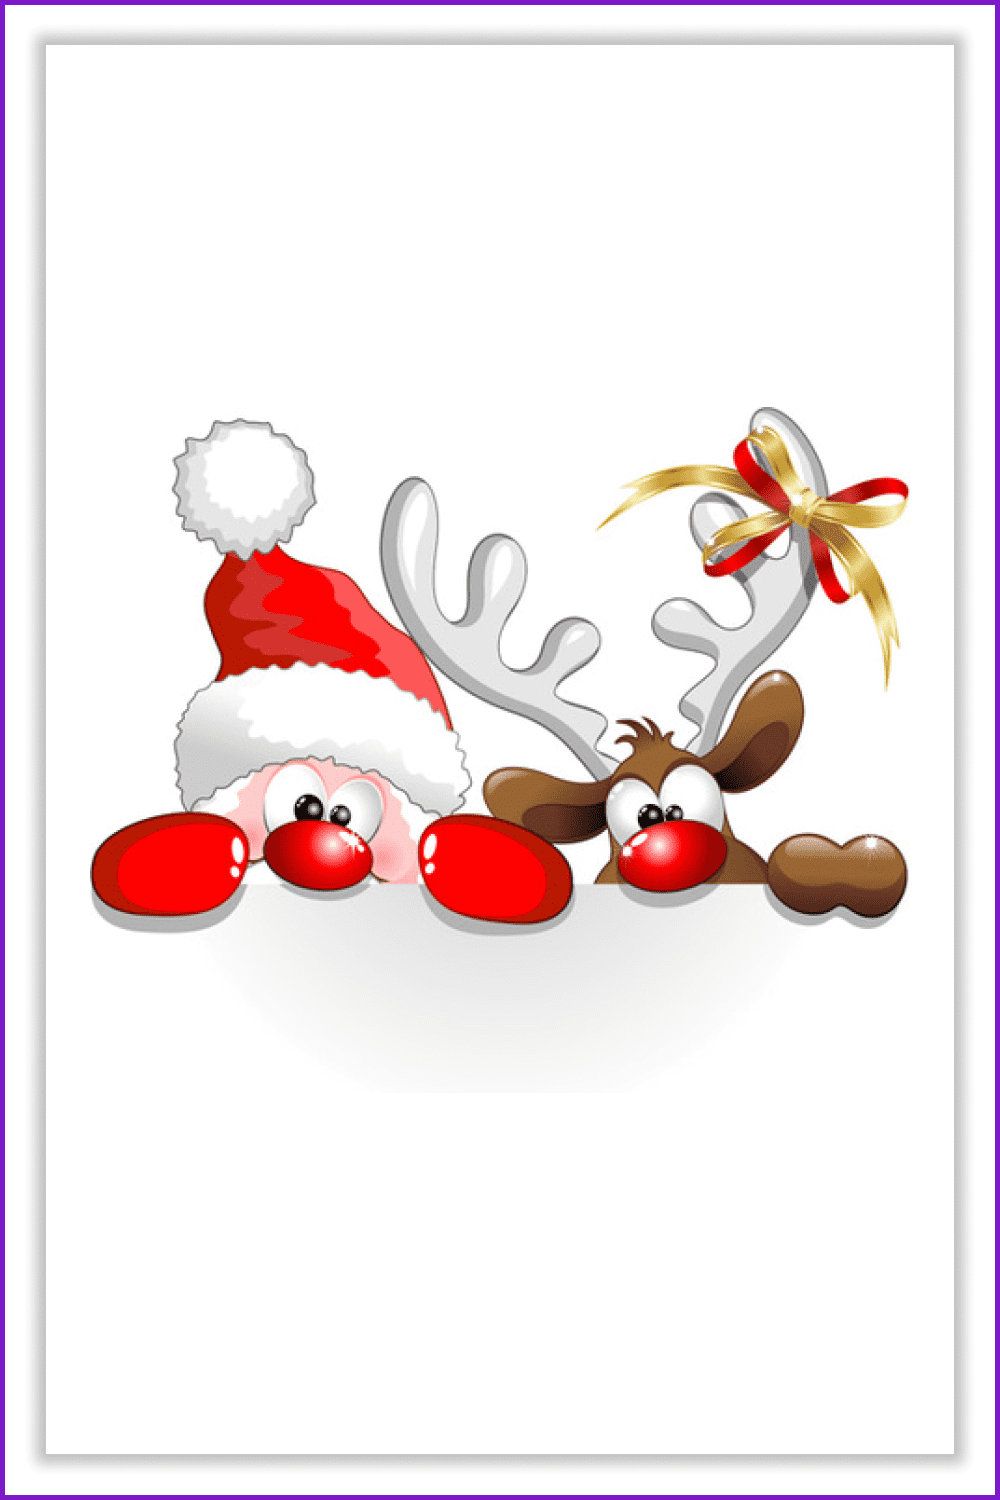 Images of funny Santa Claus and deer.